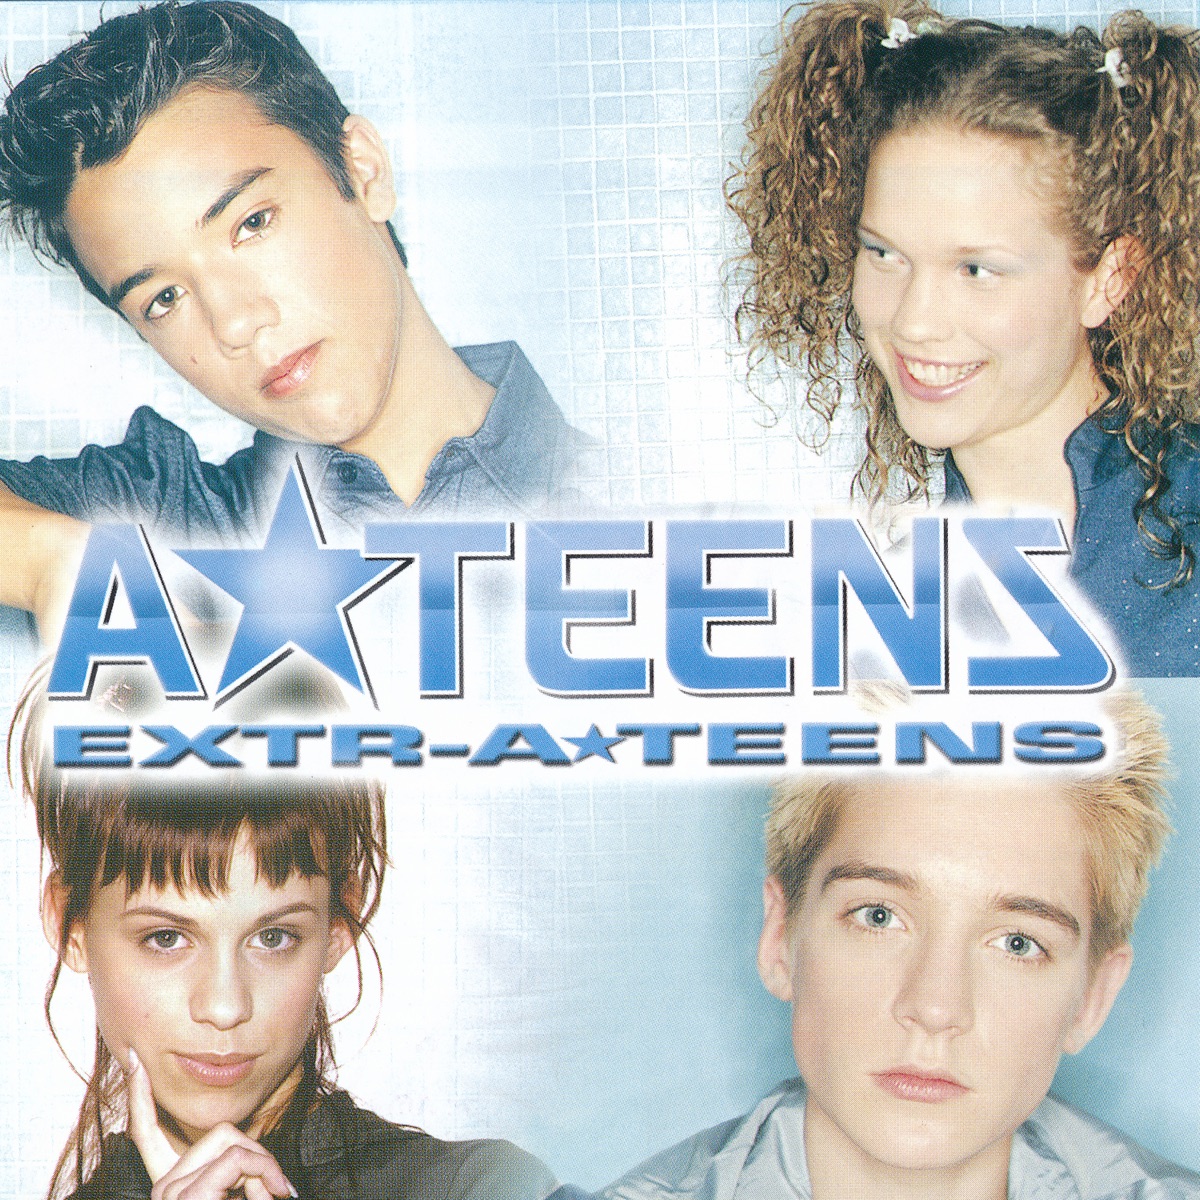 The Abba Generation - Album by A*Teens - Apple Music